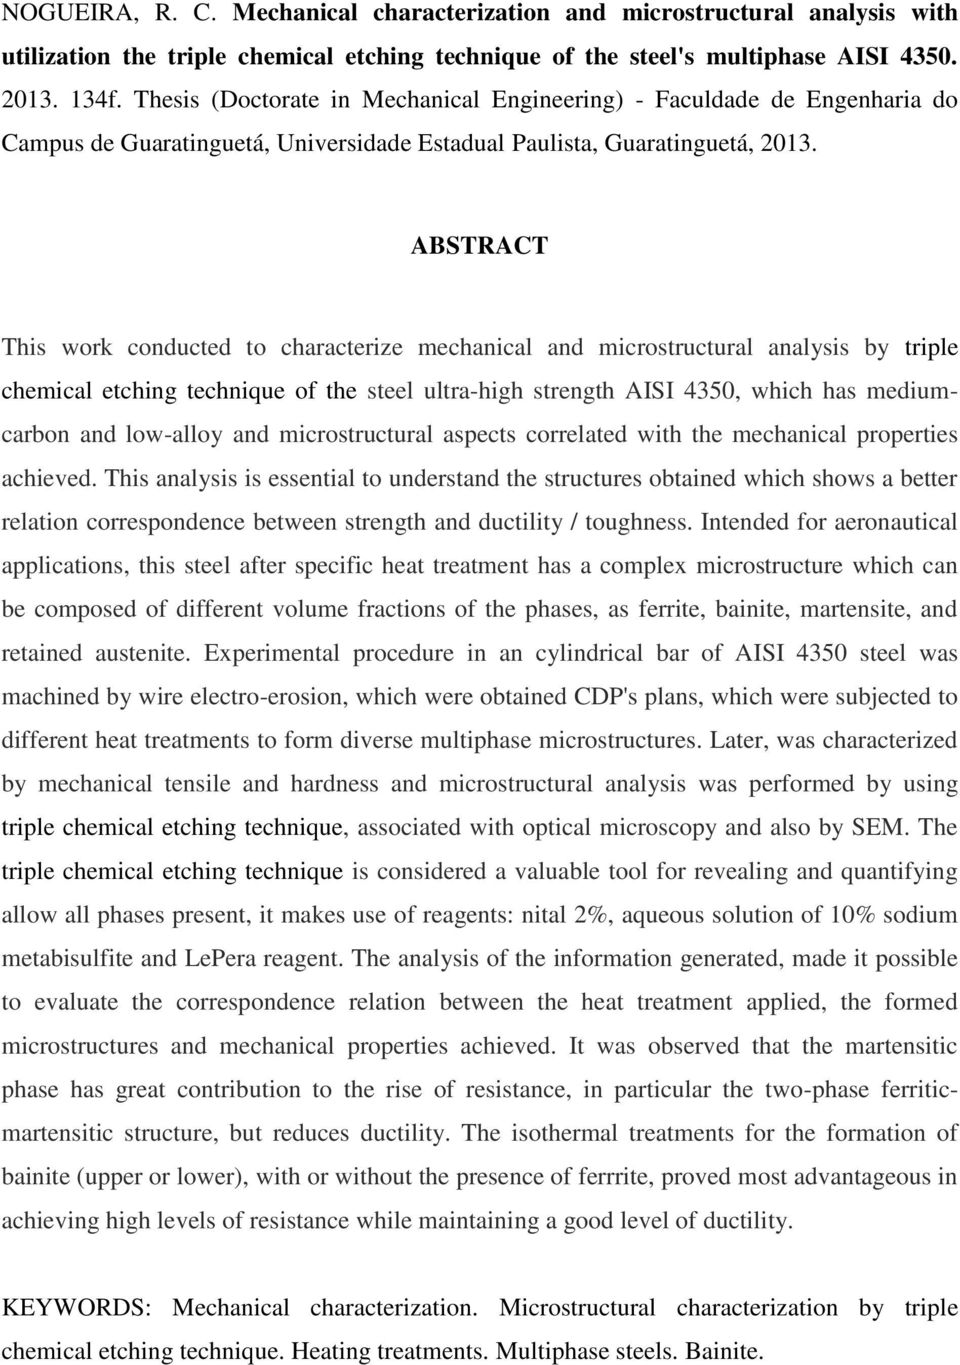 ABSTRACT This work conducted to characterize mechanical and microstructural analysis by triple chemical etching technique of the steel ultra-high strength AISI 4350, which has mediumcarbon and